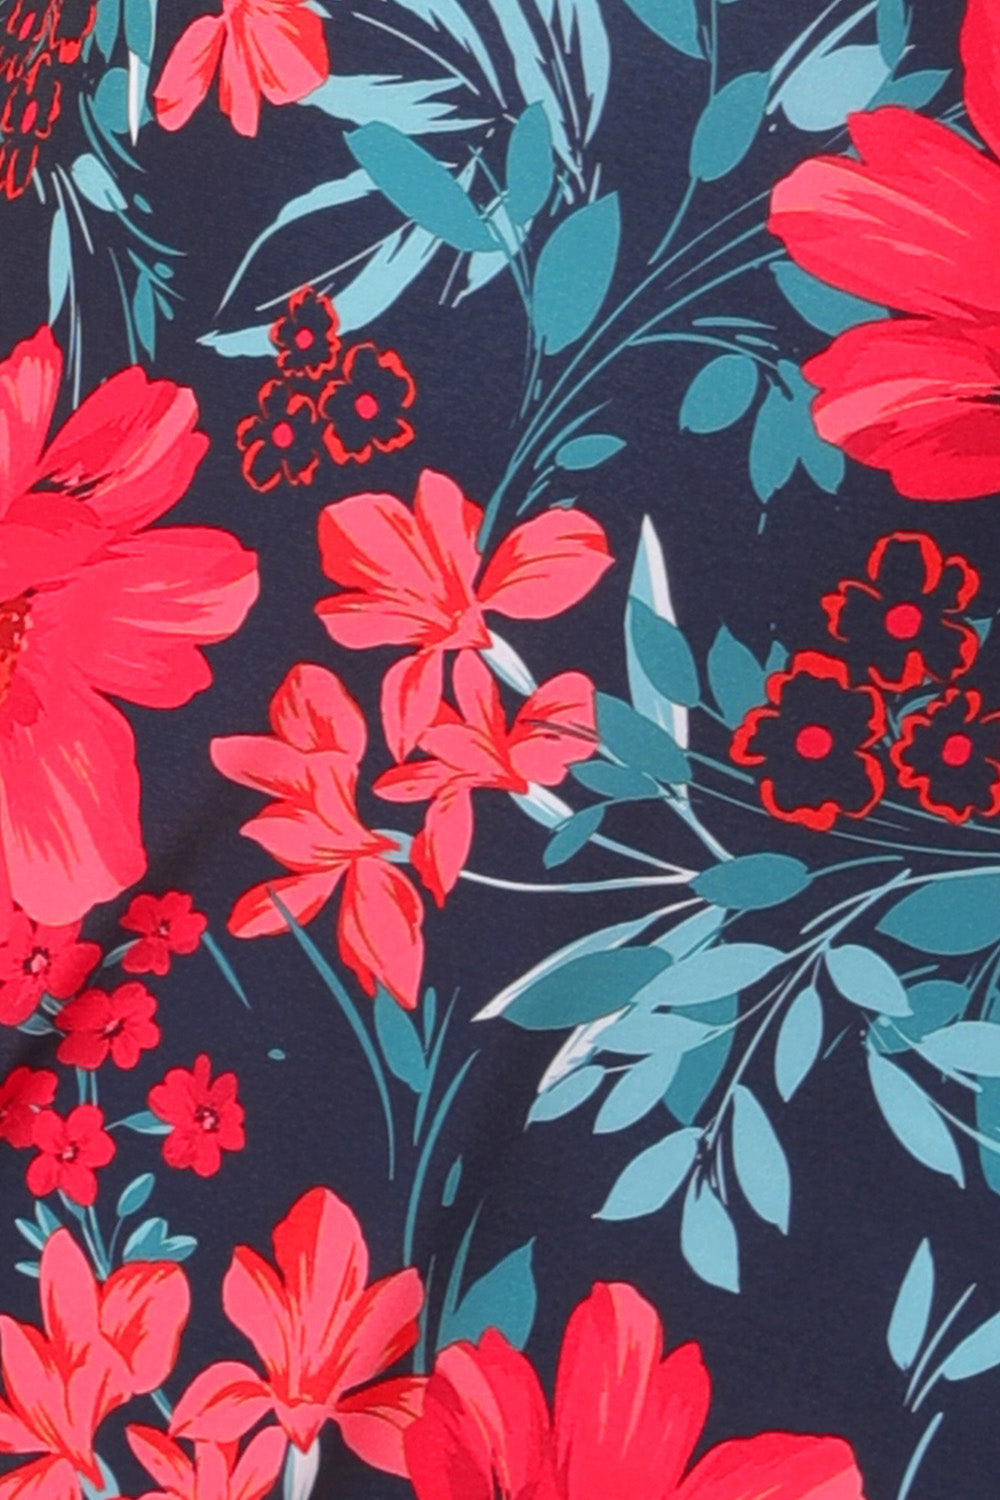 swatch of Australian and New Zealand fashion label L&F's Floraison  floral print dry touch jersey fabric used to make women's wrap dresses and casual tops.